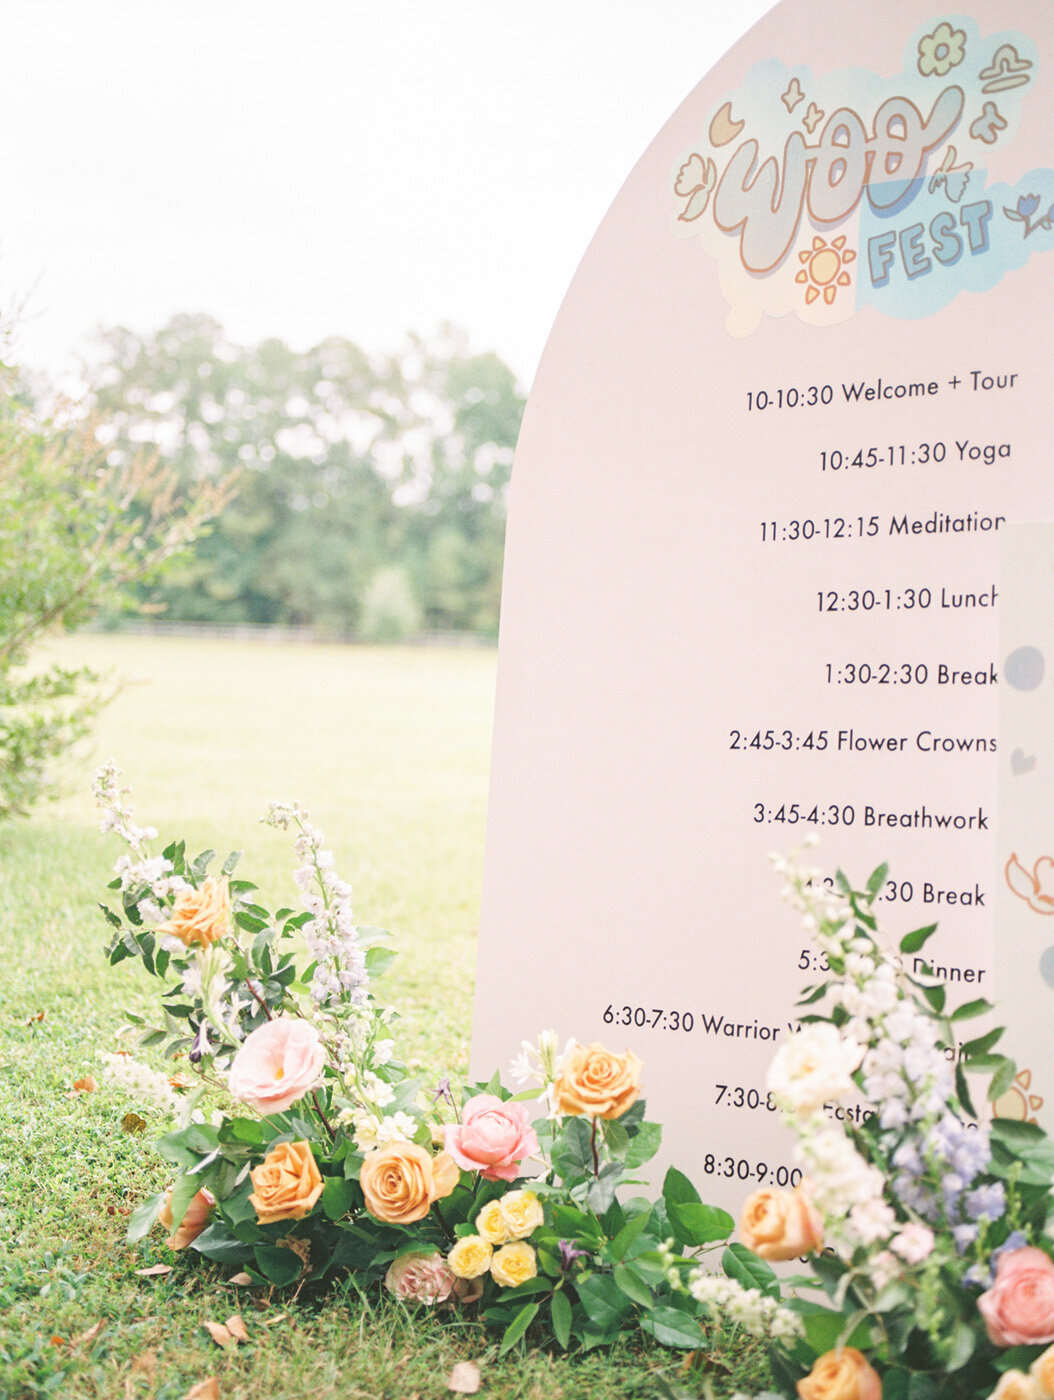 Raleigh Event Elopement Photographer | Jessica Agee Photography - 028